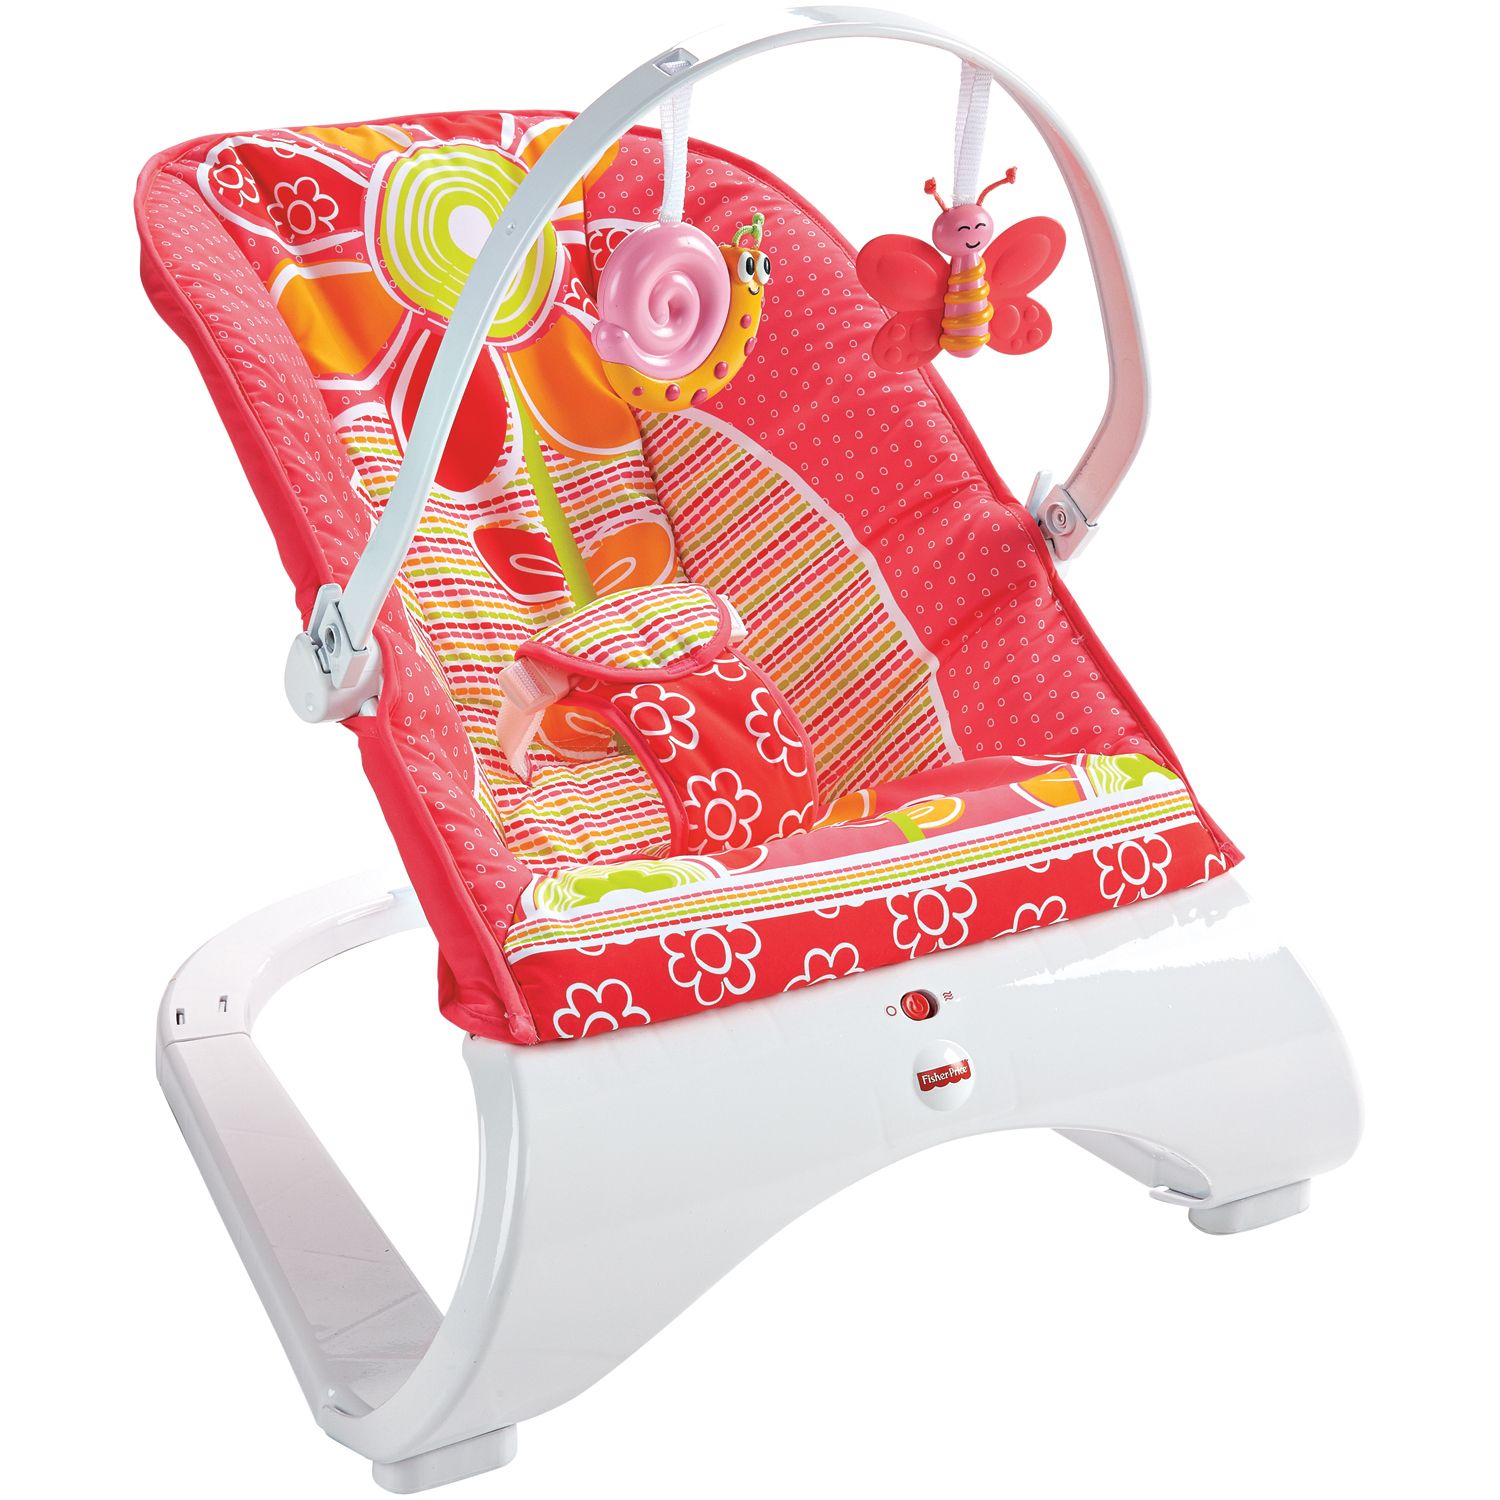 fisher price elephant bouncer